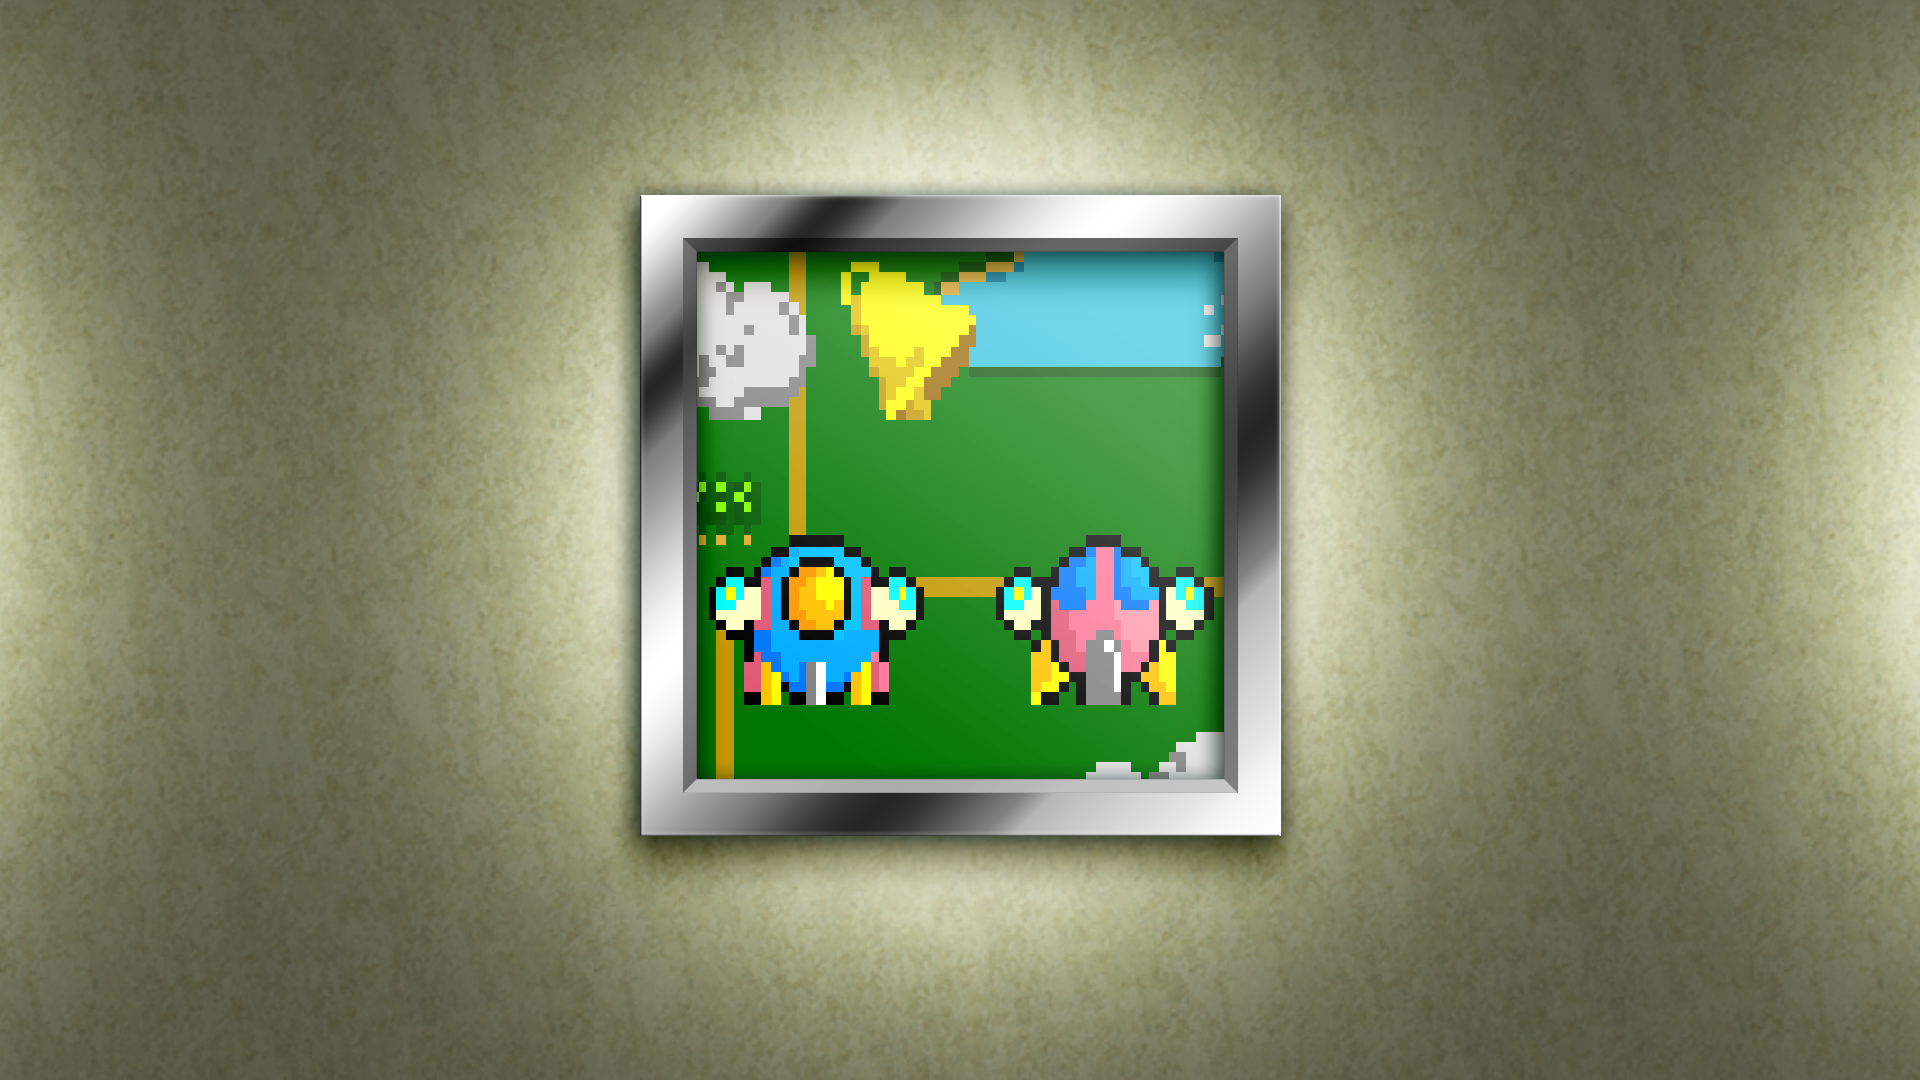 Icon for TwinBee and WinBee aim for Victory!